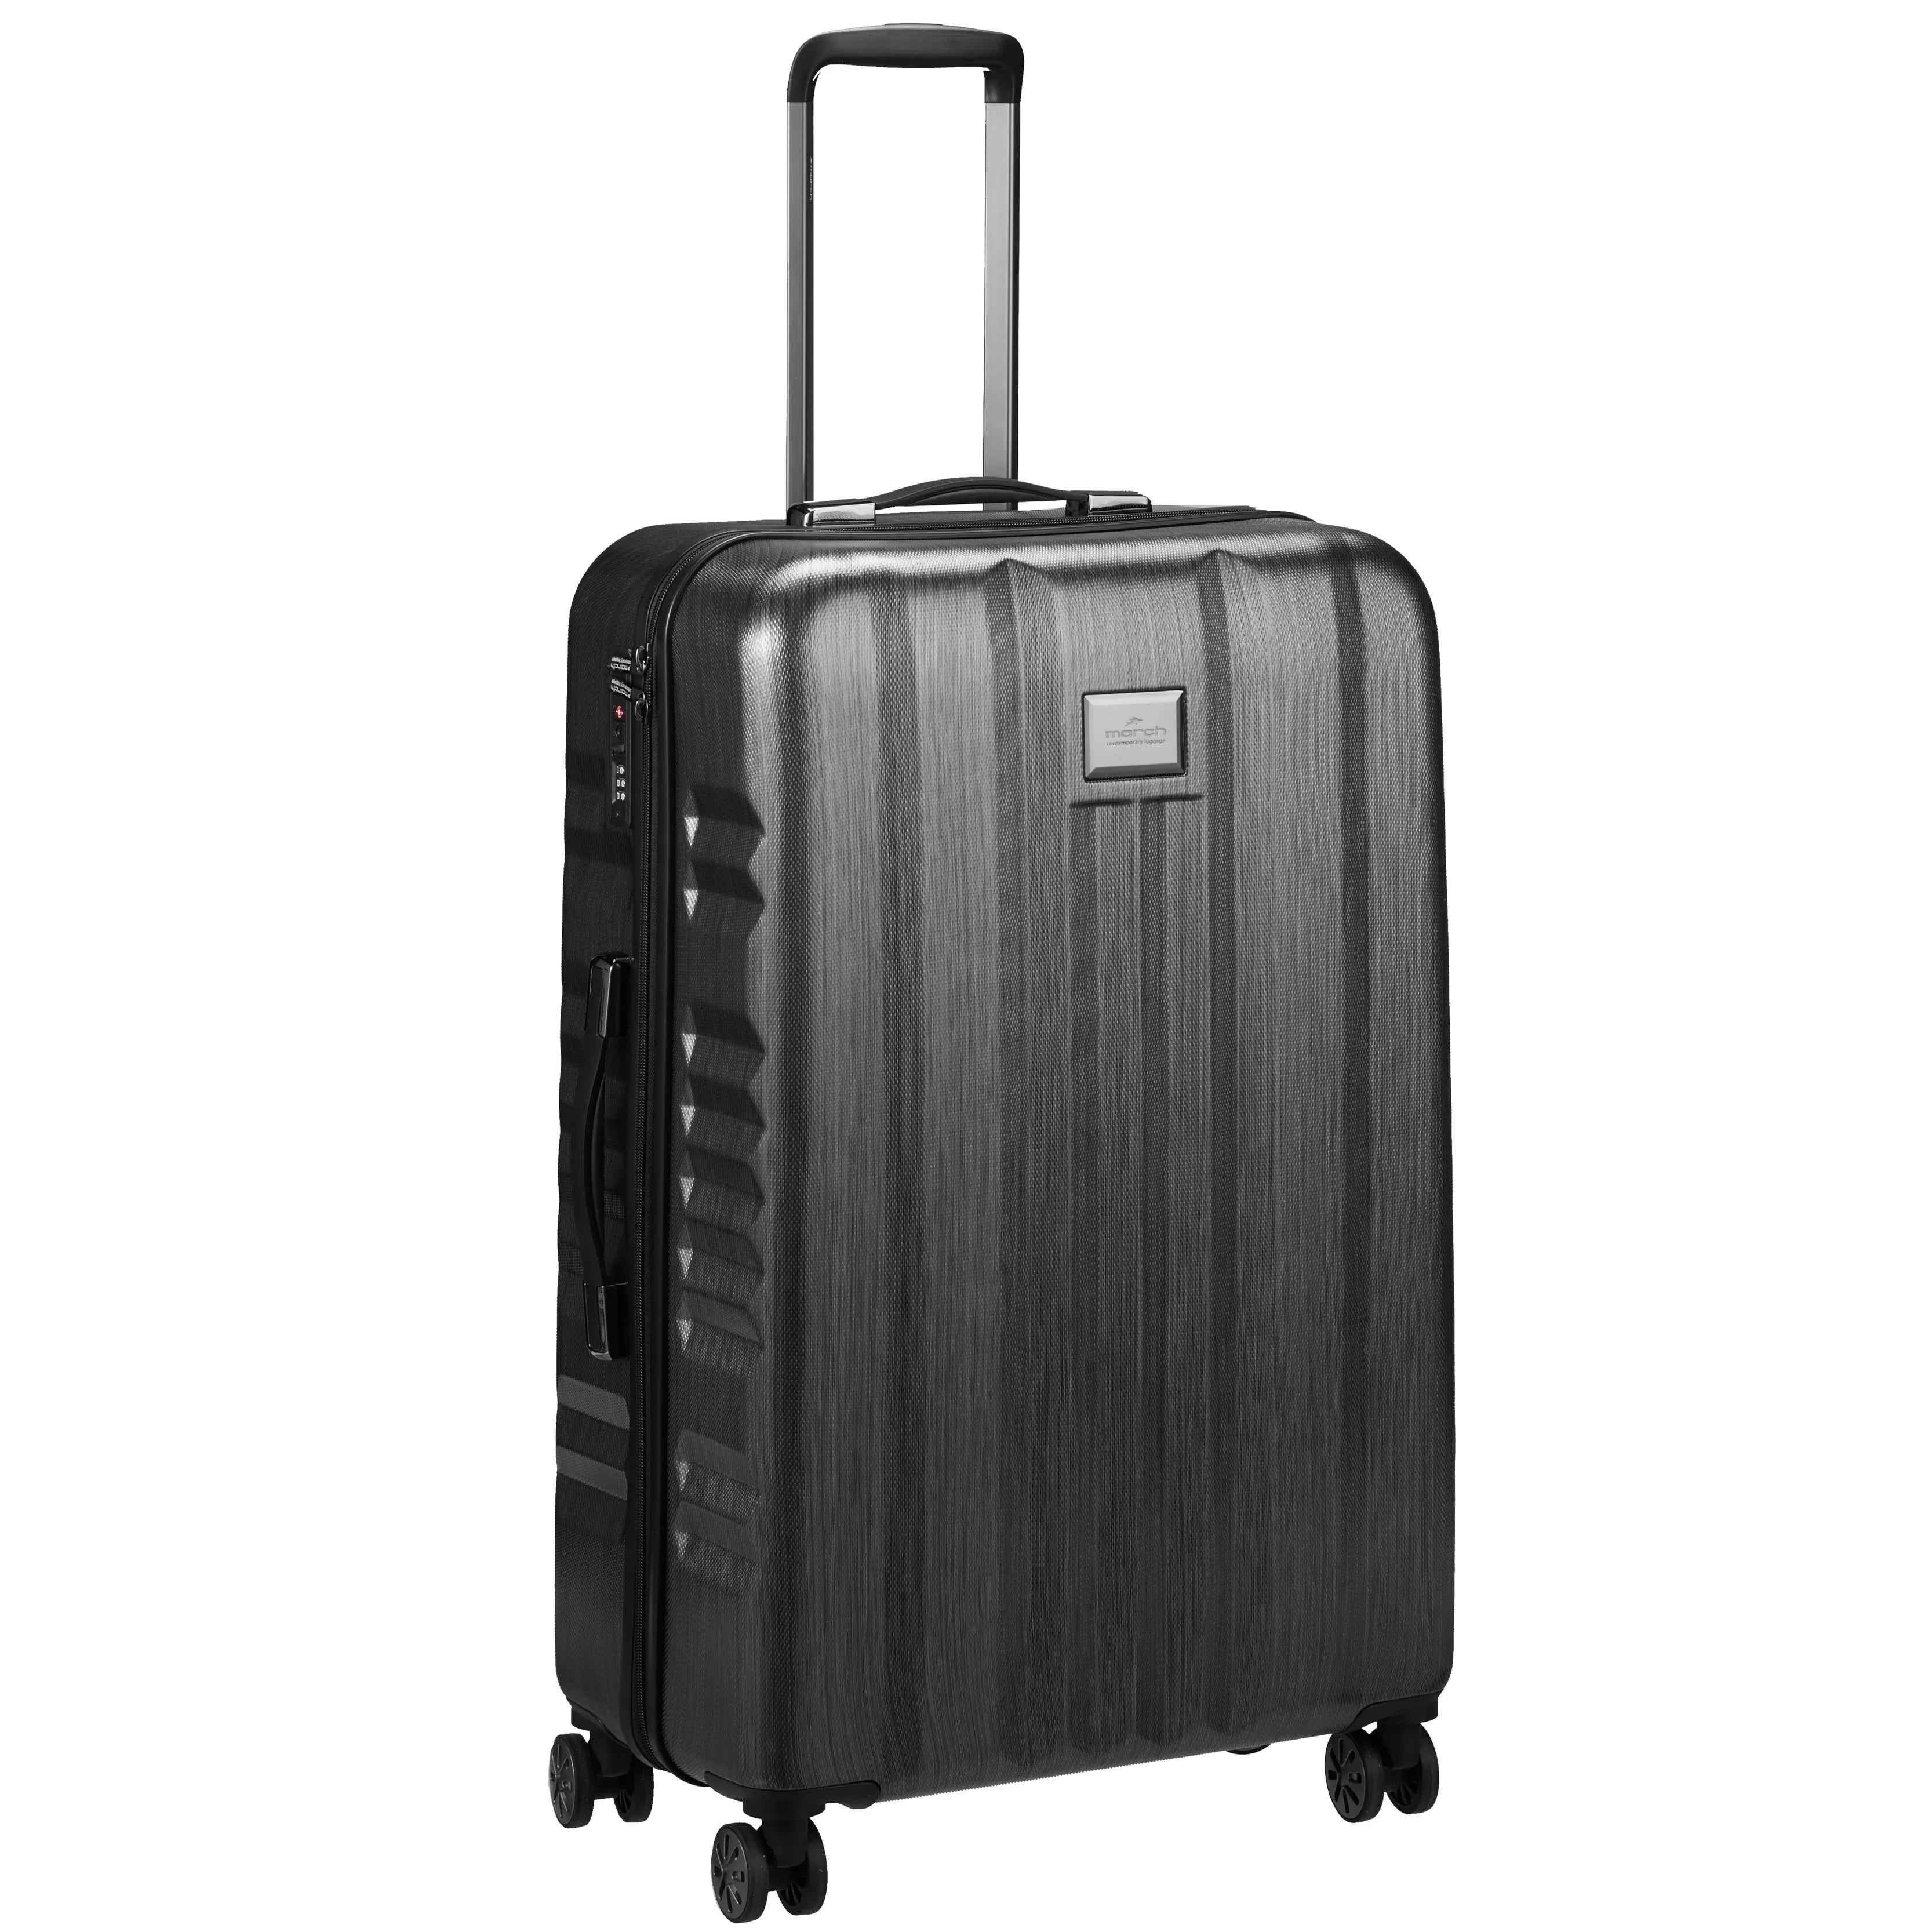 March 15 Trading Fly 4-wheel trolley 75 cm - black brushed